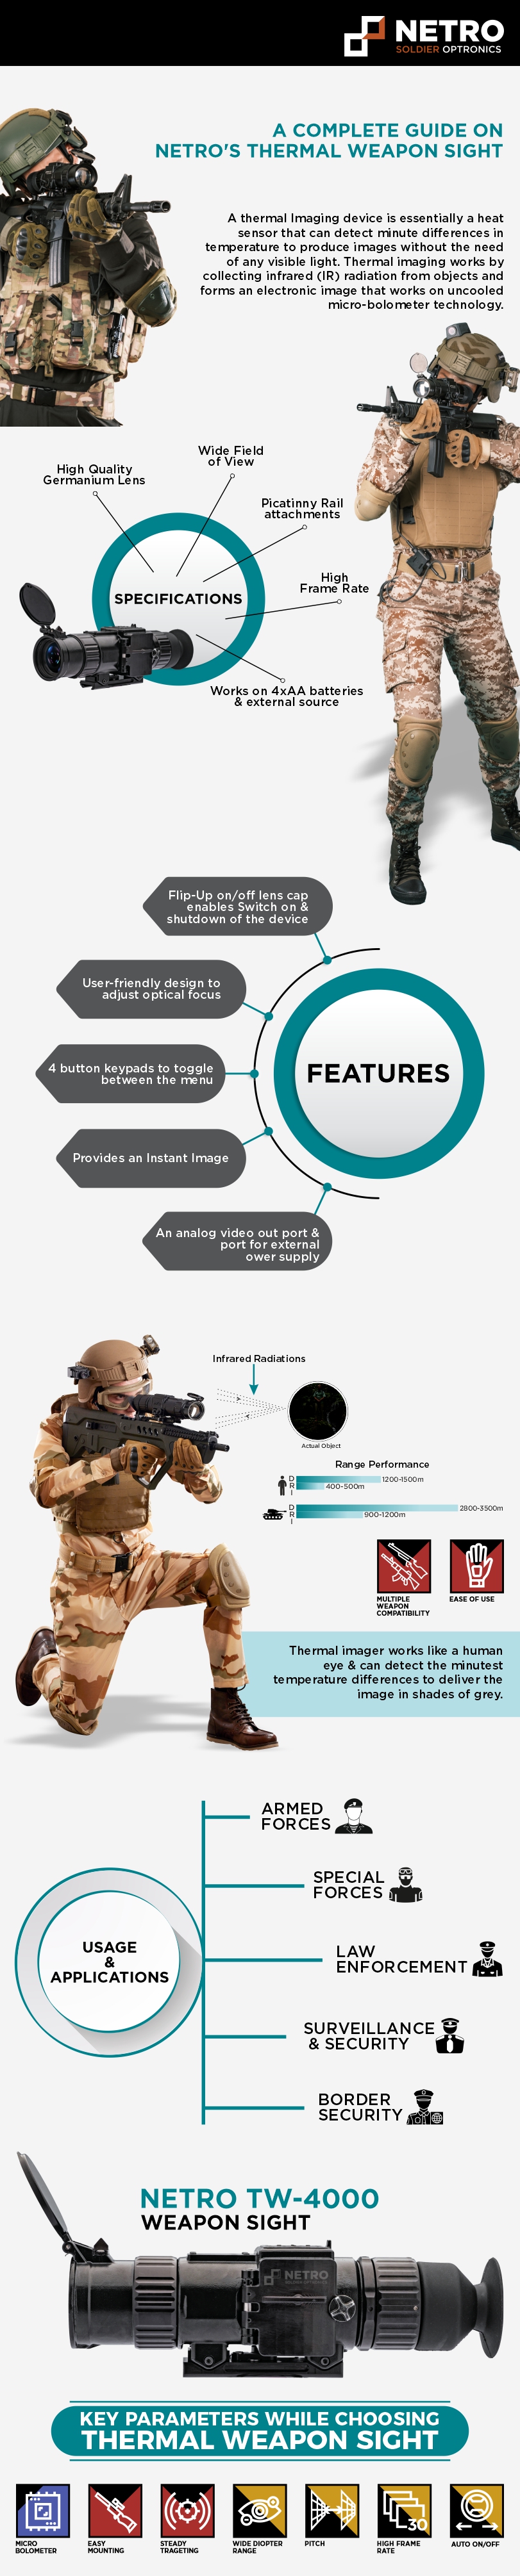 A complete guide on Netro's Thermal Weapon sight - Infographics